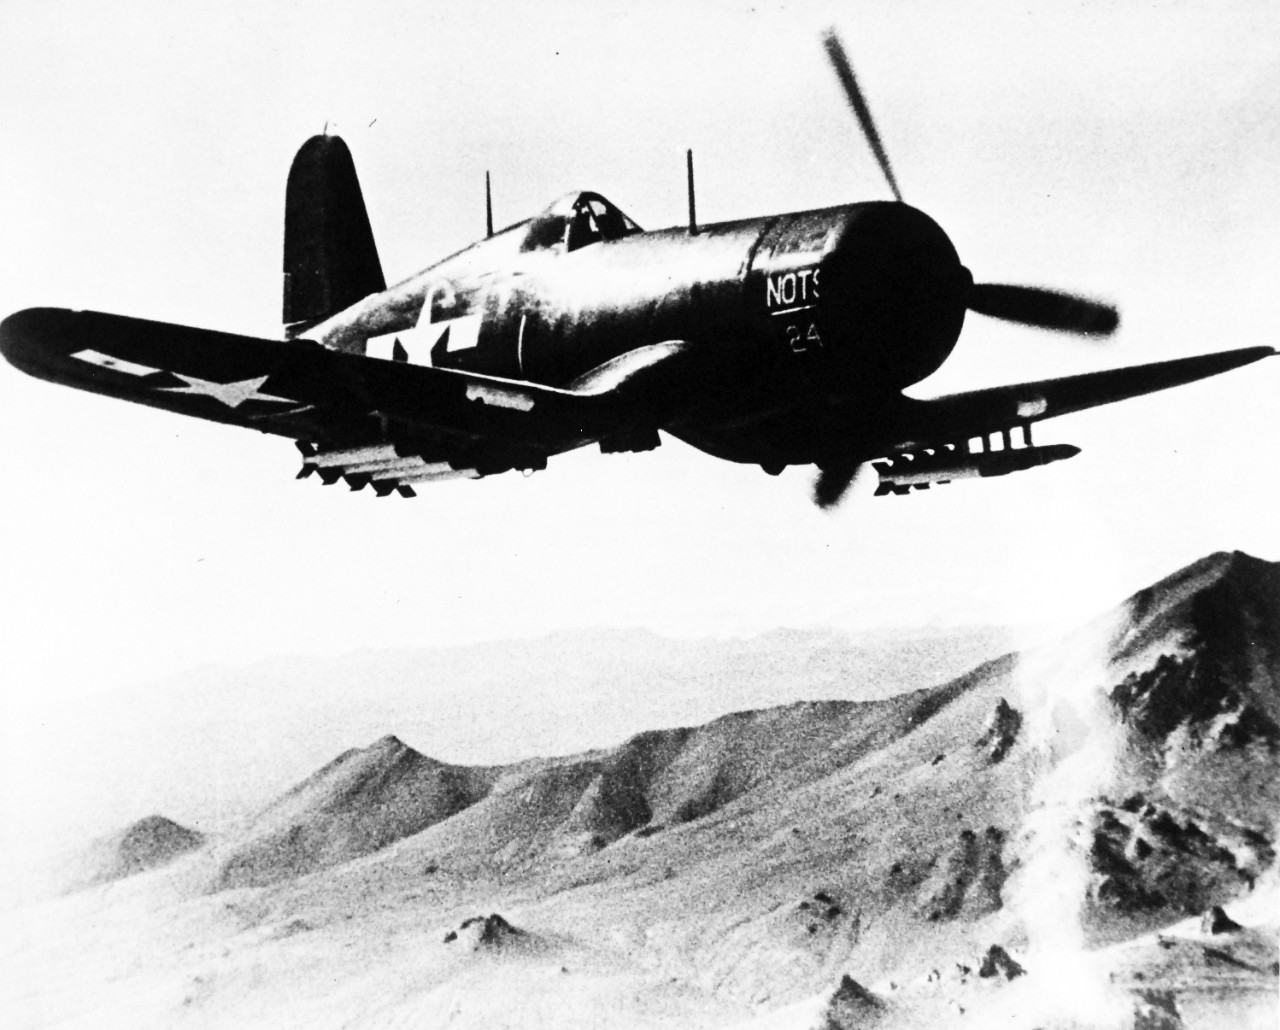 80-G-49315: Vought F4U Corsair, June 1945.  F4U loaded with rockets from Naval Ordnance Test Station, Inyokern, California, June 5, 1945.  Shown:  Plane loaded with eight 5” rockets roars out to testing range.    Official U.S. Navy Photograph, now in the collections of the National Archives.  